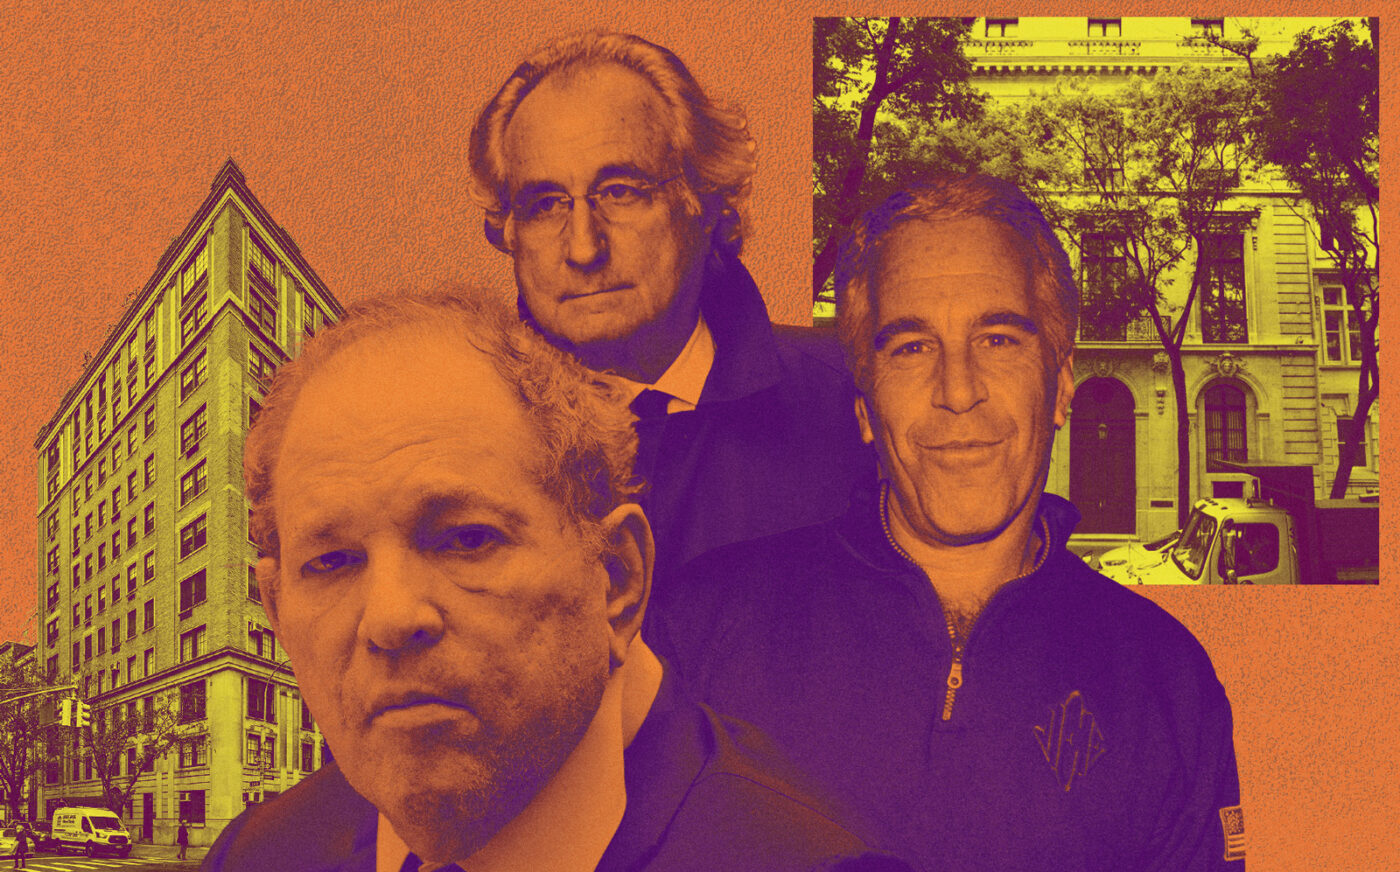 From left: Harvey Weinstein, Bernie Madoff, and Jeffrey Epstein with 133 East 64th Street and Epstein's former townhouse at East 71st Street